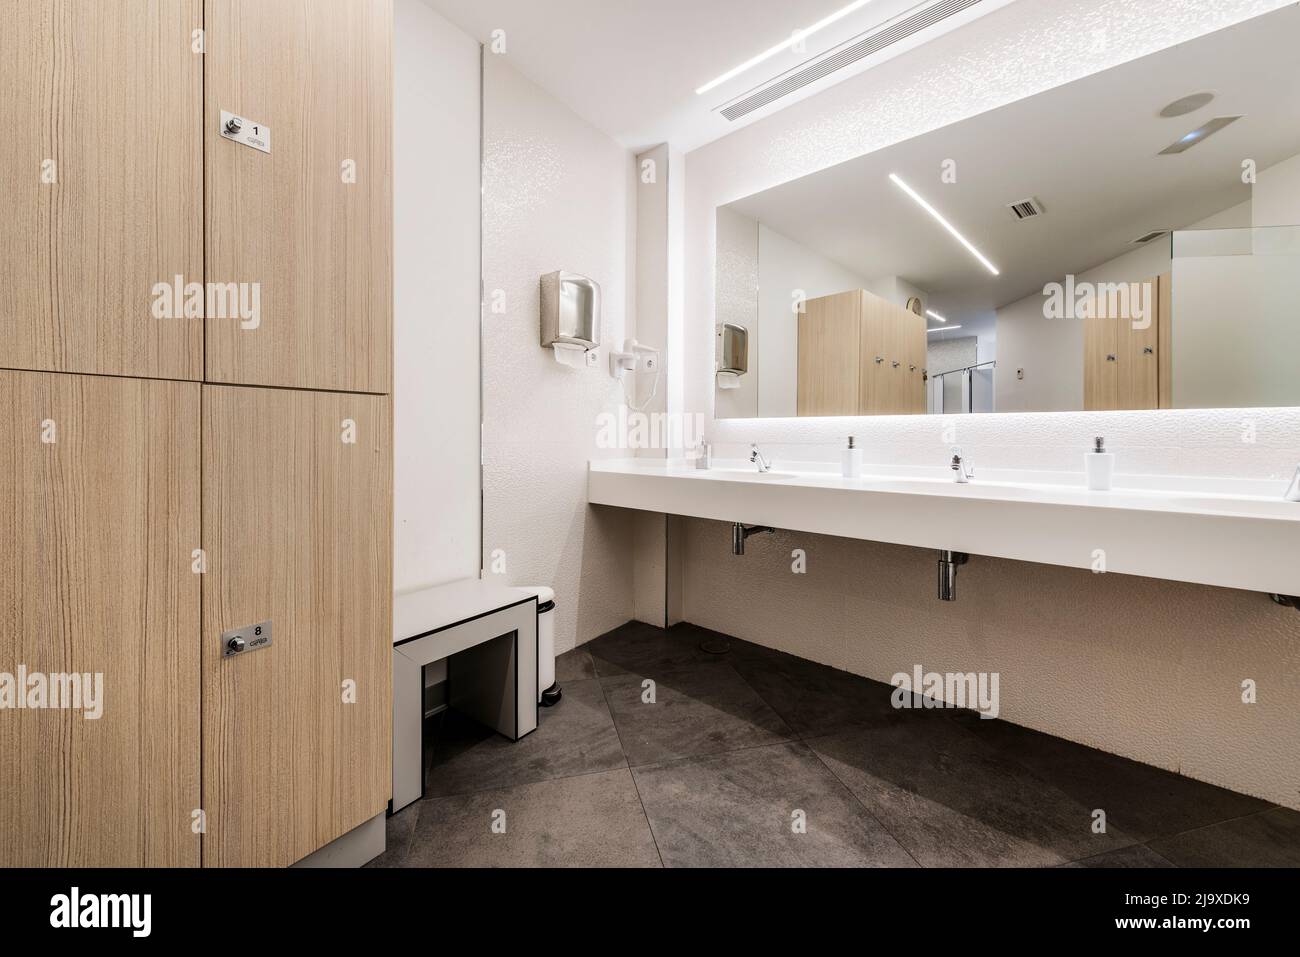 Restroom of a gym locker room with a wooden locker cabinet and a white resin washbasin with a mirror integrated into the wall Stock Photo